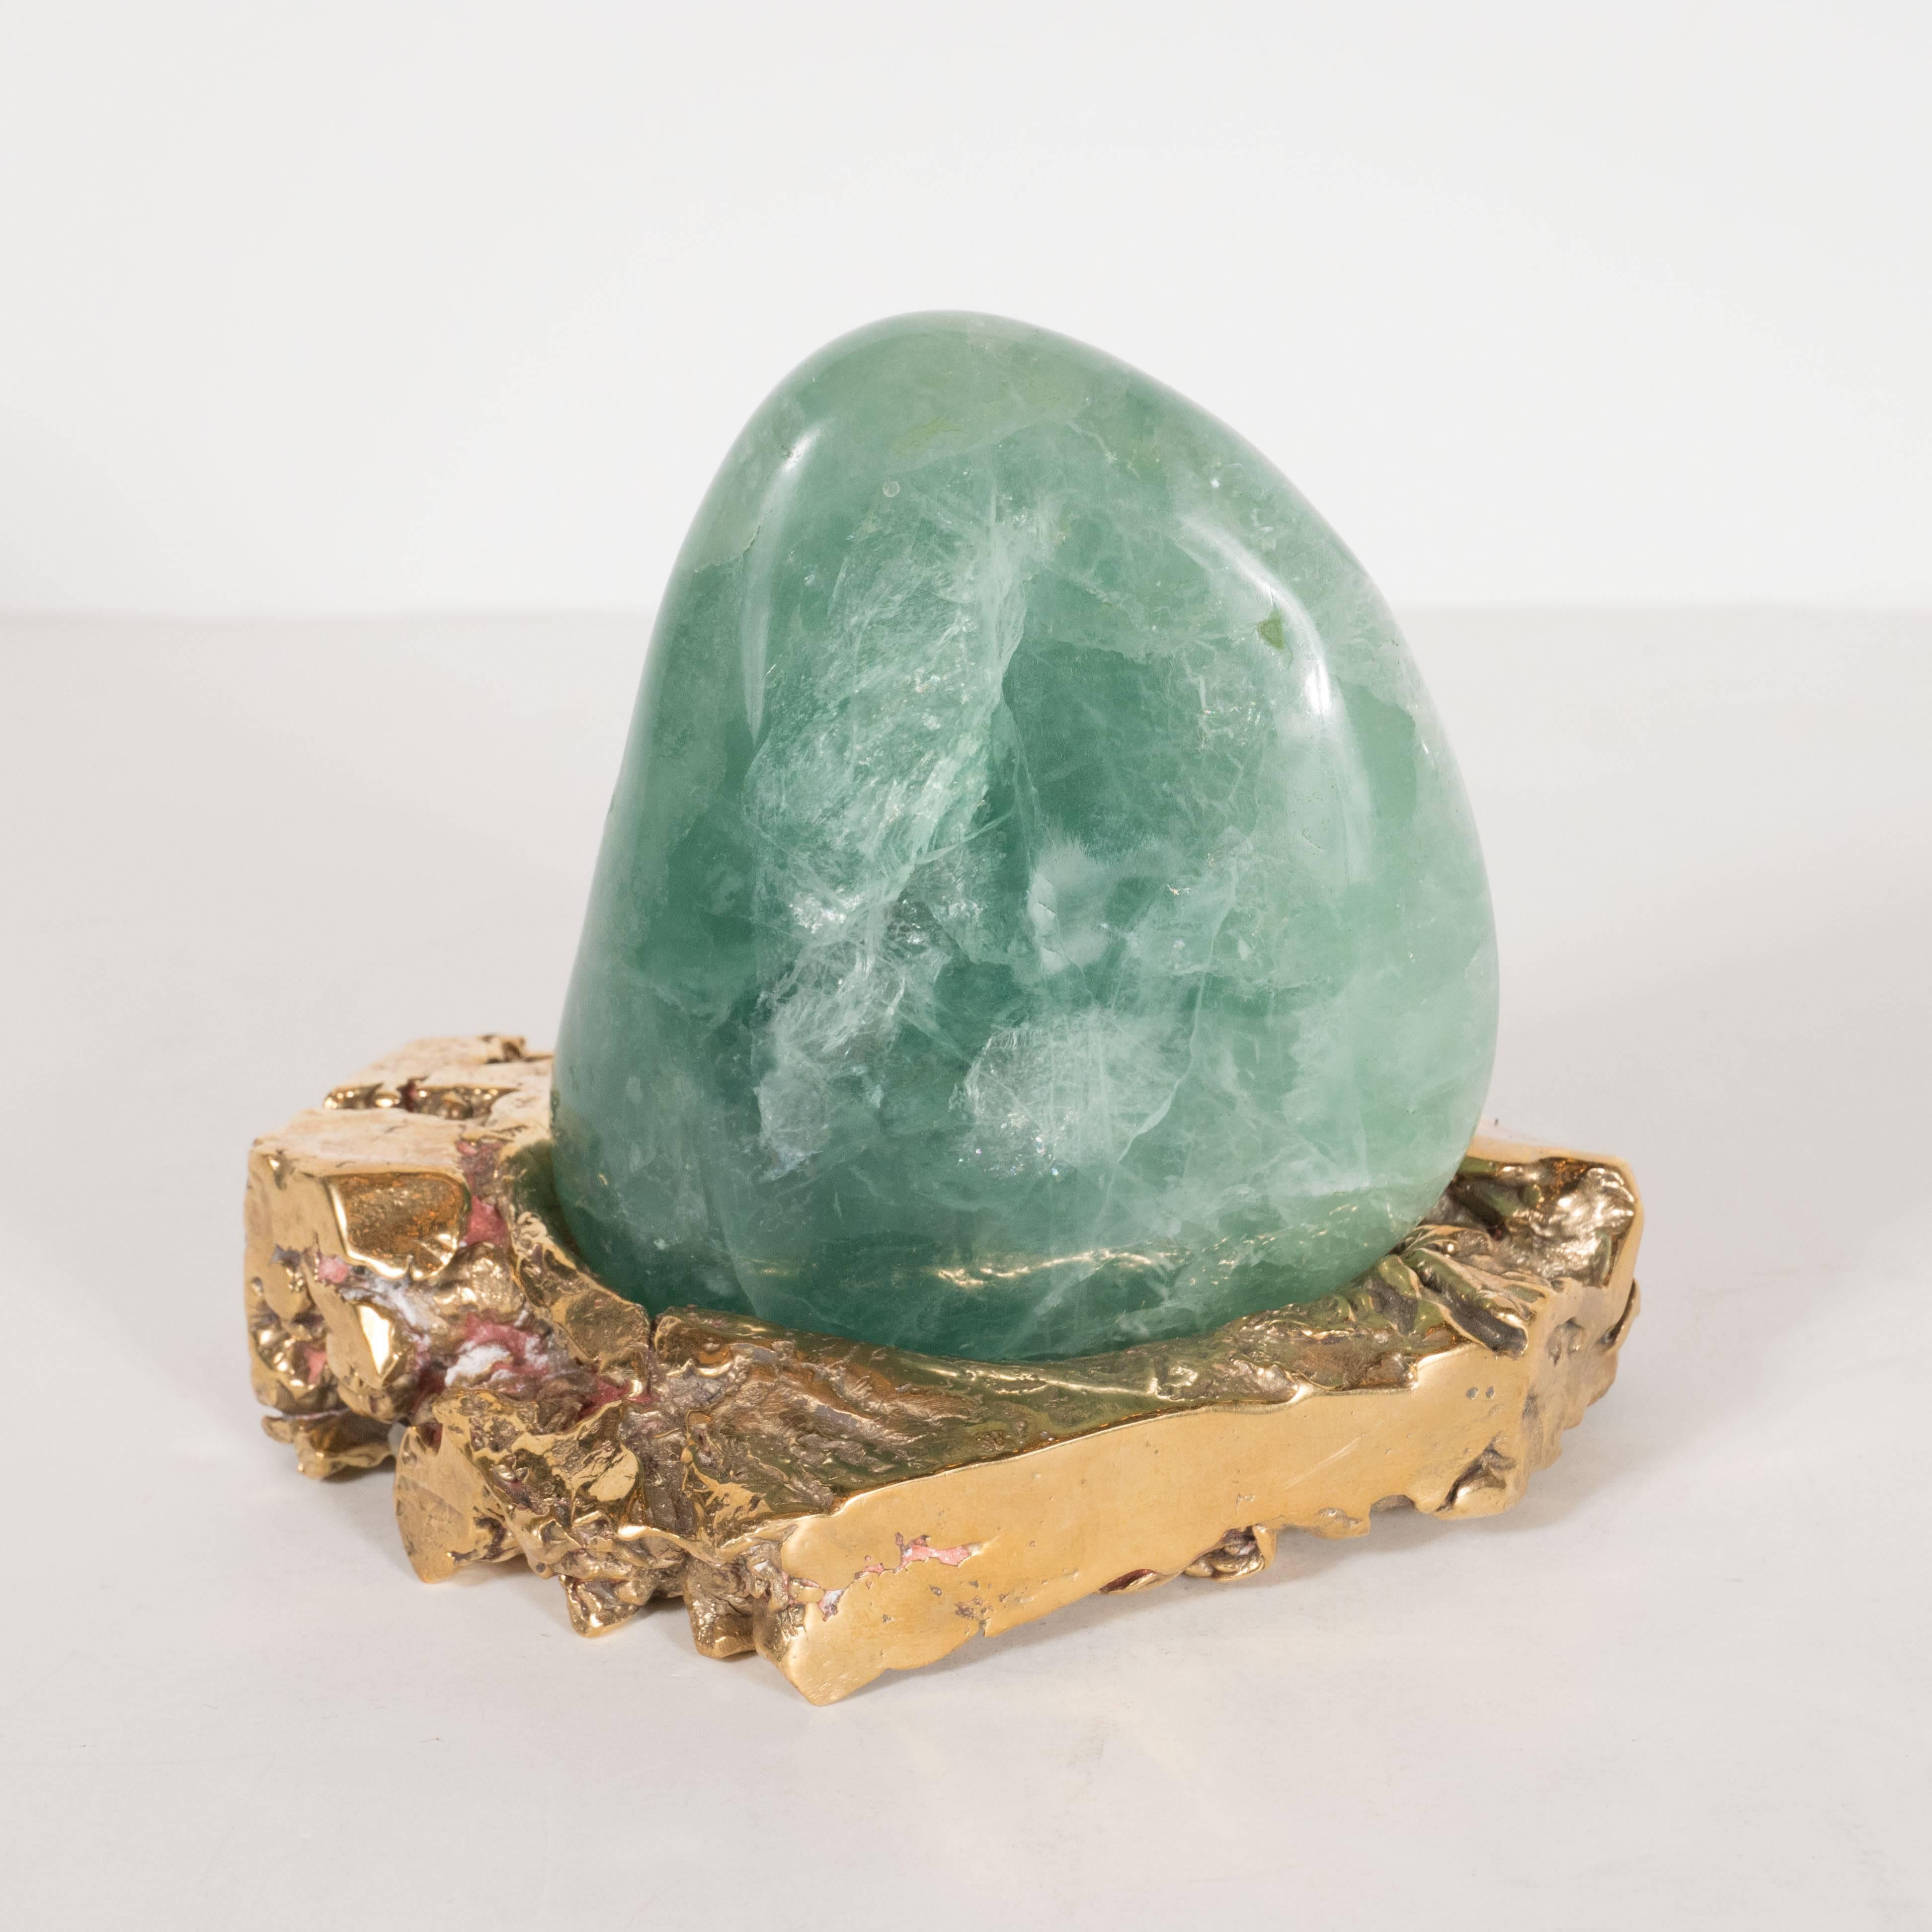 This oblong shaped green agate has been painstakingly polished and shaped to rest perfectly in its lustrous custom-made bronze base. The stone is of an entrancing milky jade hue, which pairs exceptionally well with its base forged of a particularly